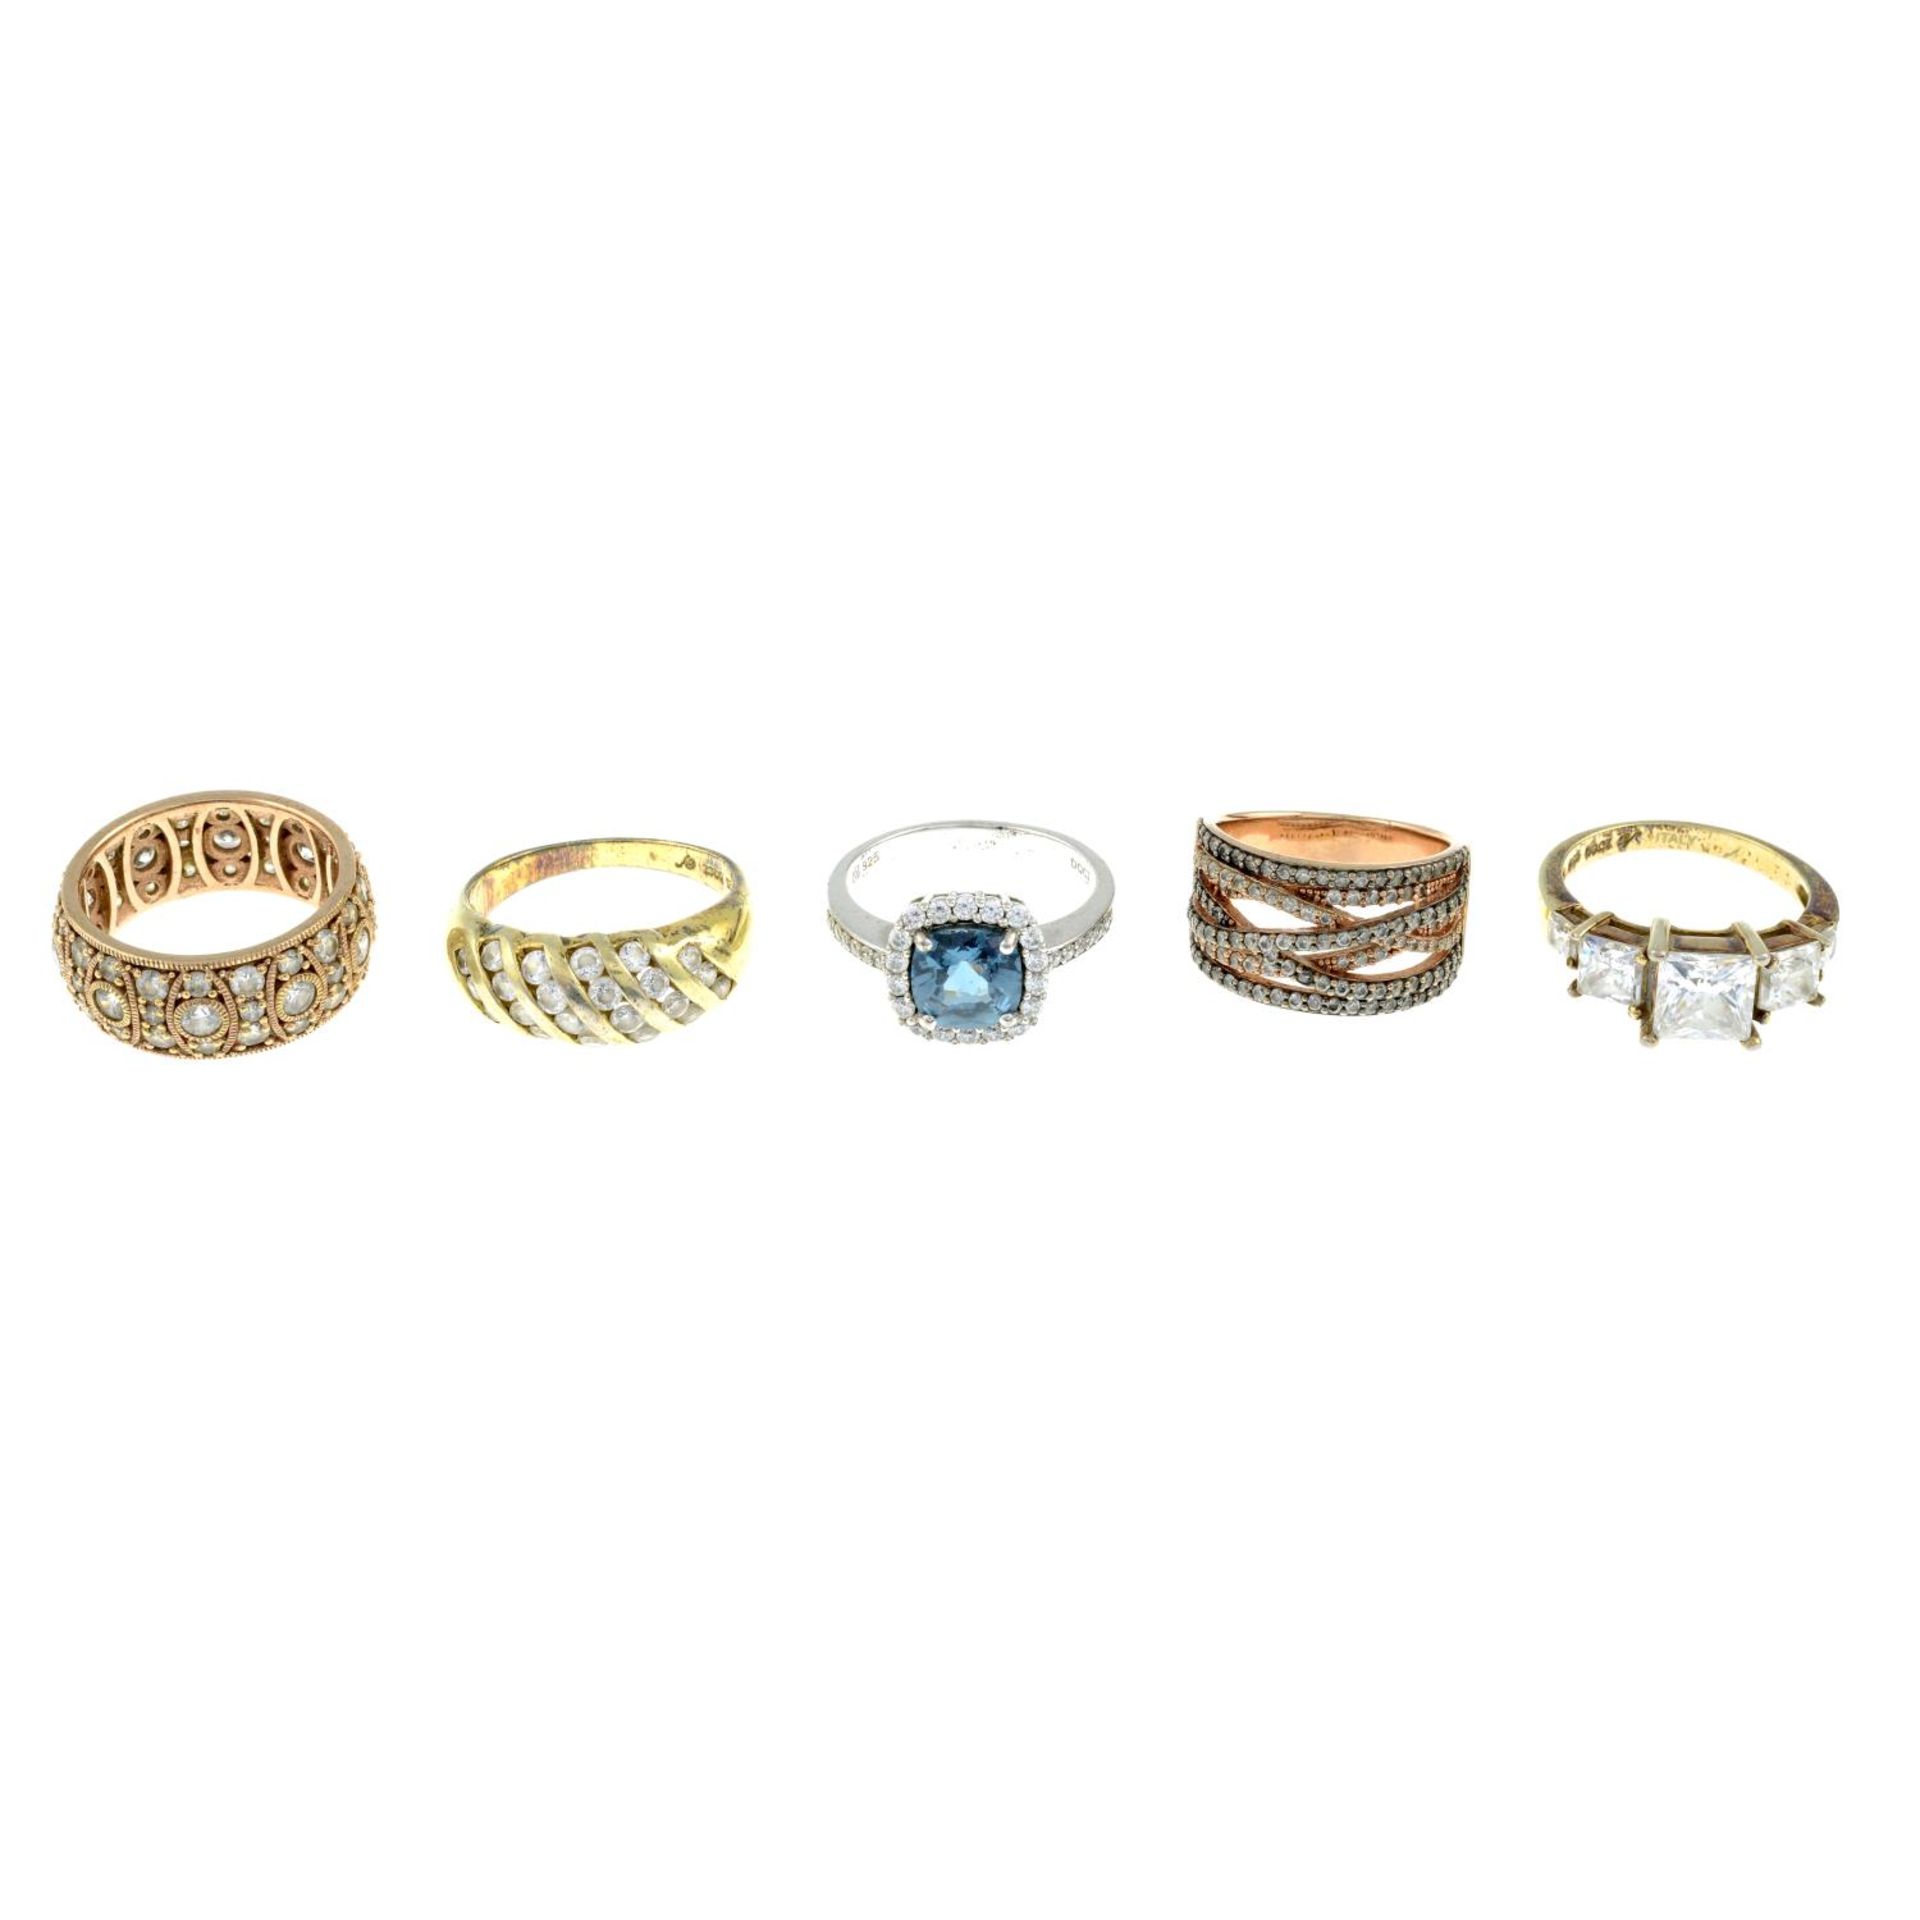 A selection of jewellery, to include two silver bracelets with heart locket charms.